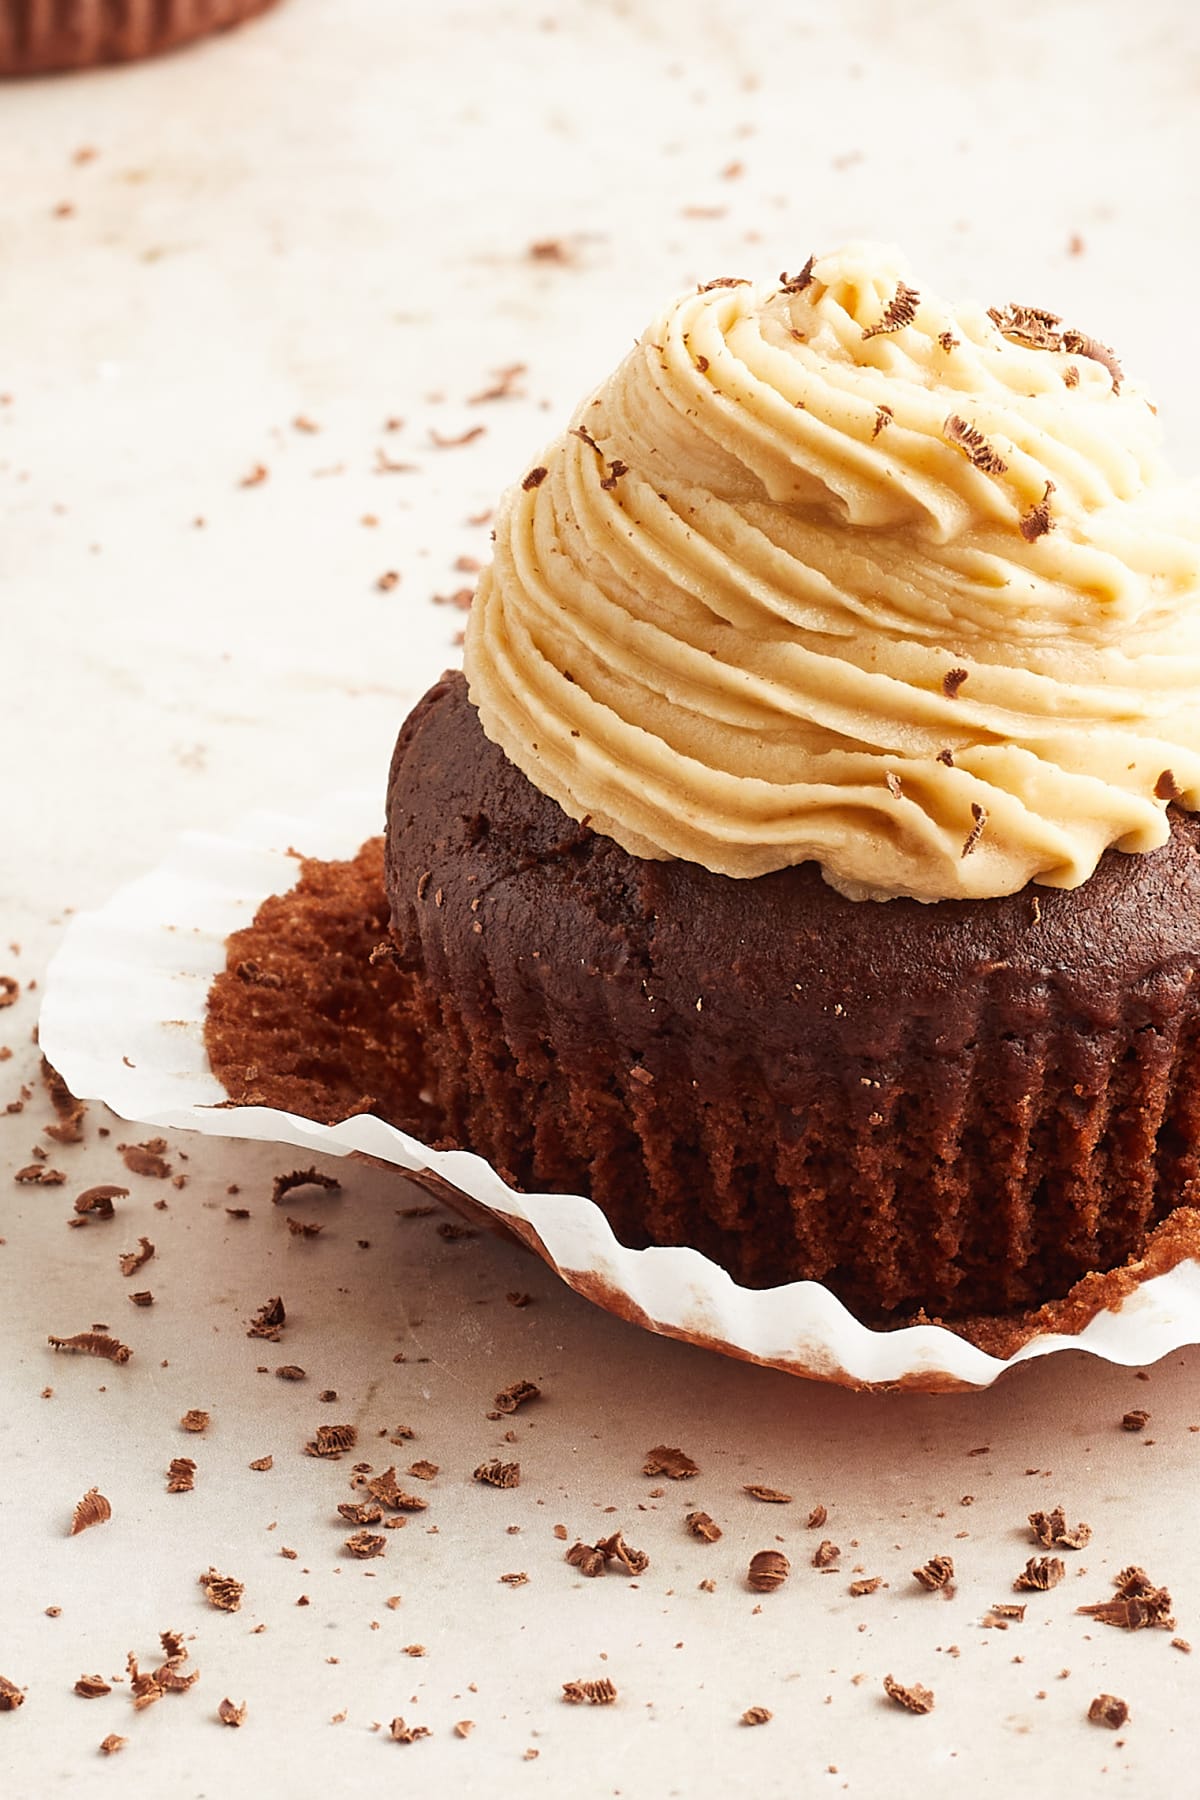 One chocolate cupcake with peanut butter frosting piped on top. The white paper wrapper is partially removed.